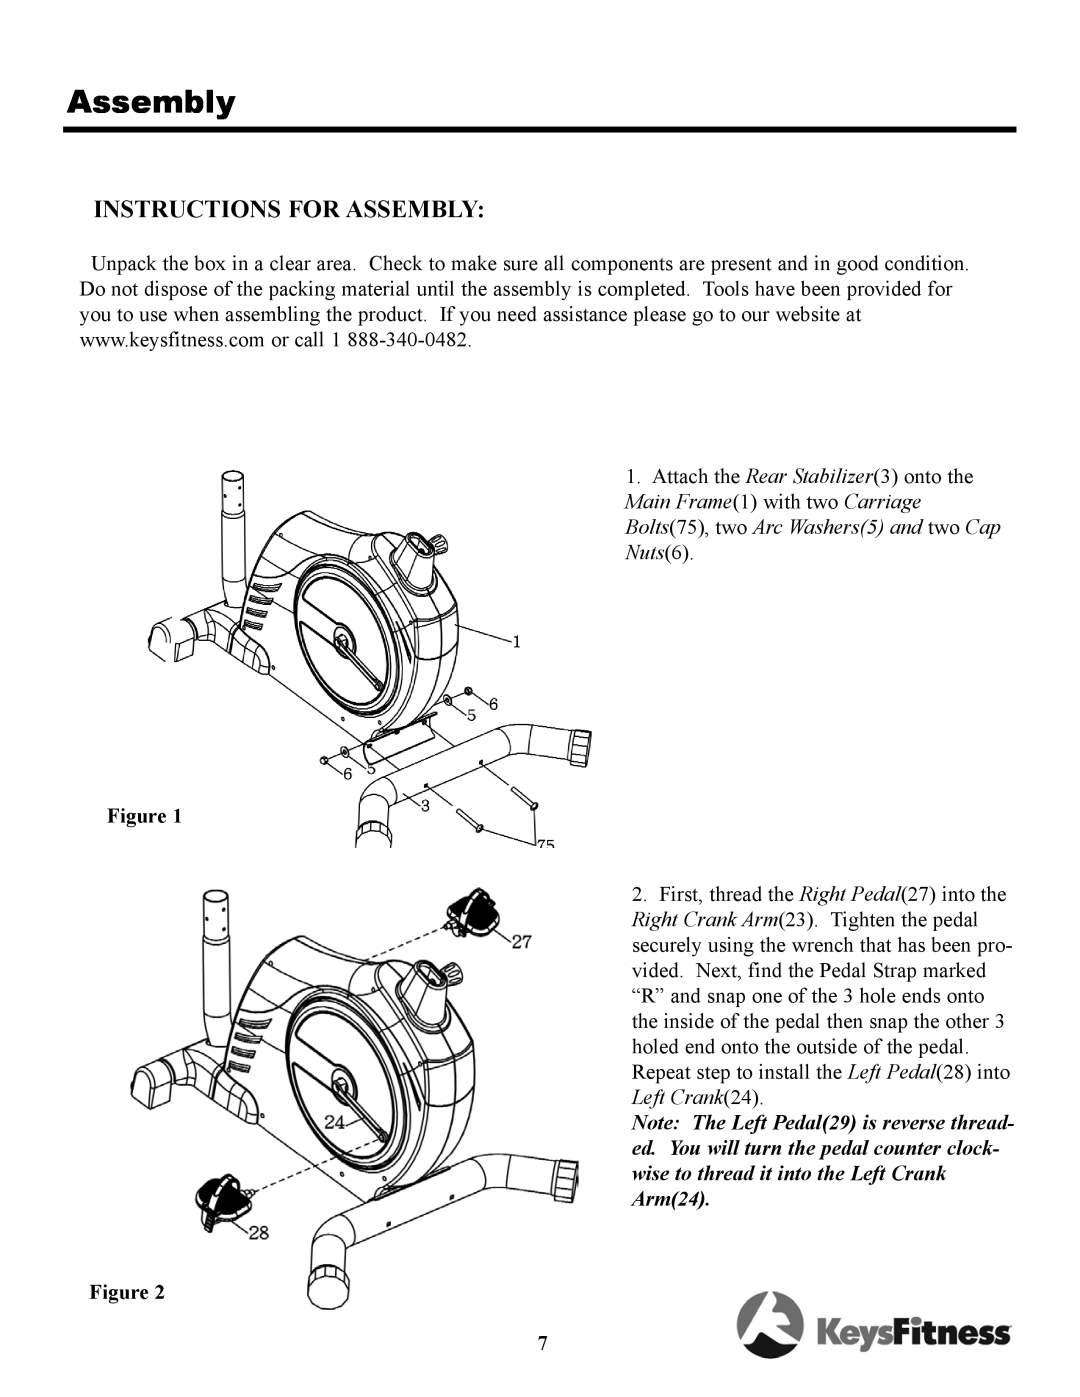 Keys Fitness 700u owner manual Instructions For Assembly 